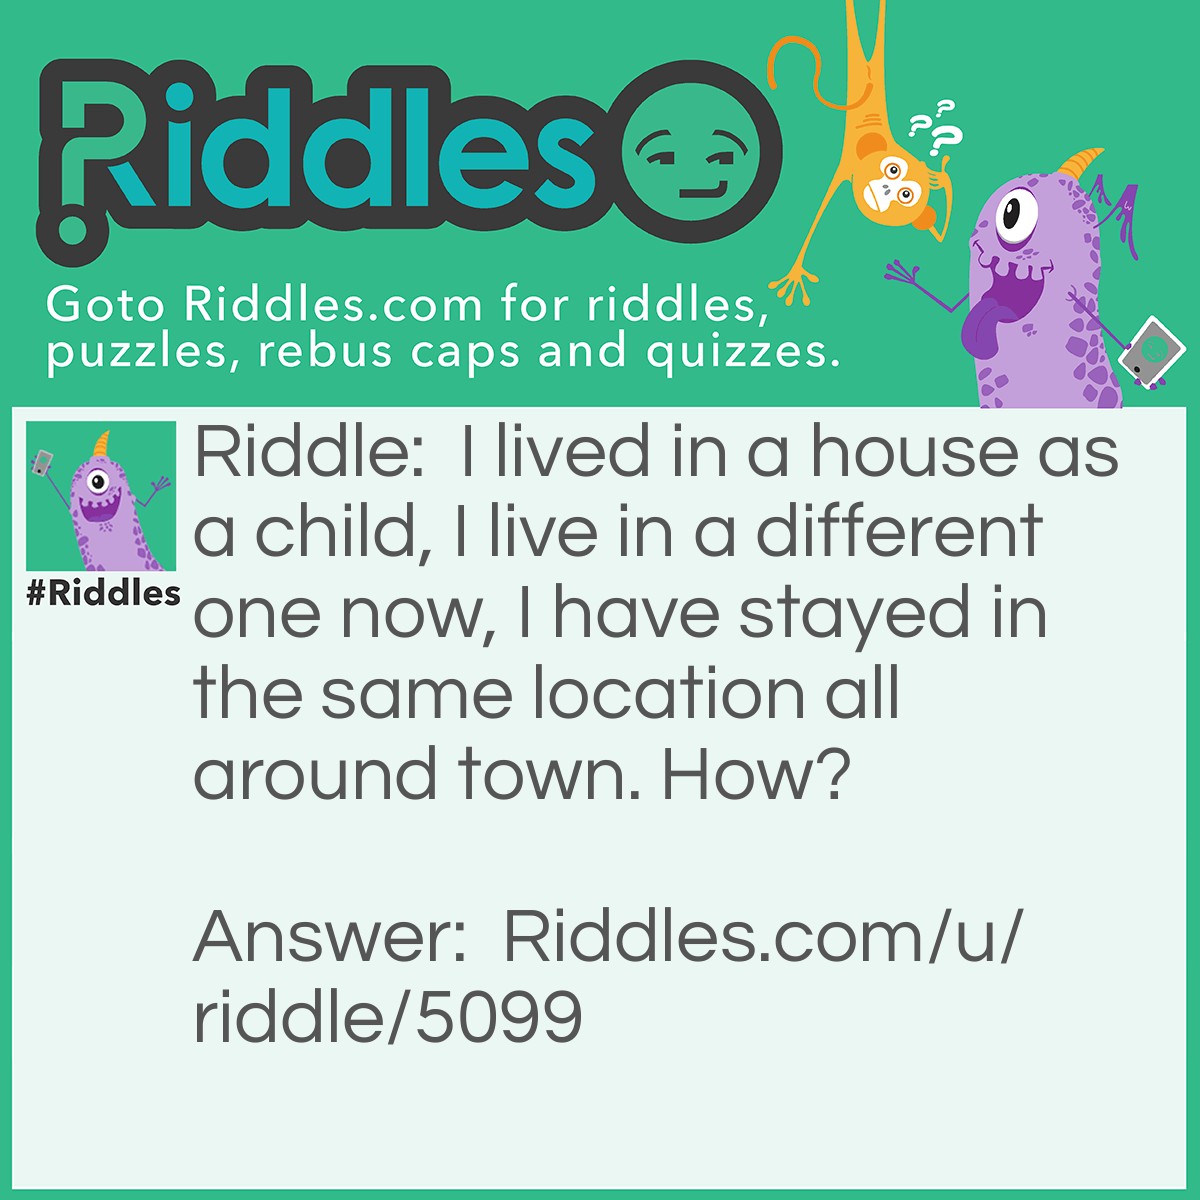 Riddle: I lived in a house as a child, I live in a different one now, I have stayed in the same location all around town. How? Answer: Same property, different house.